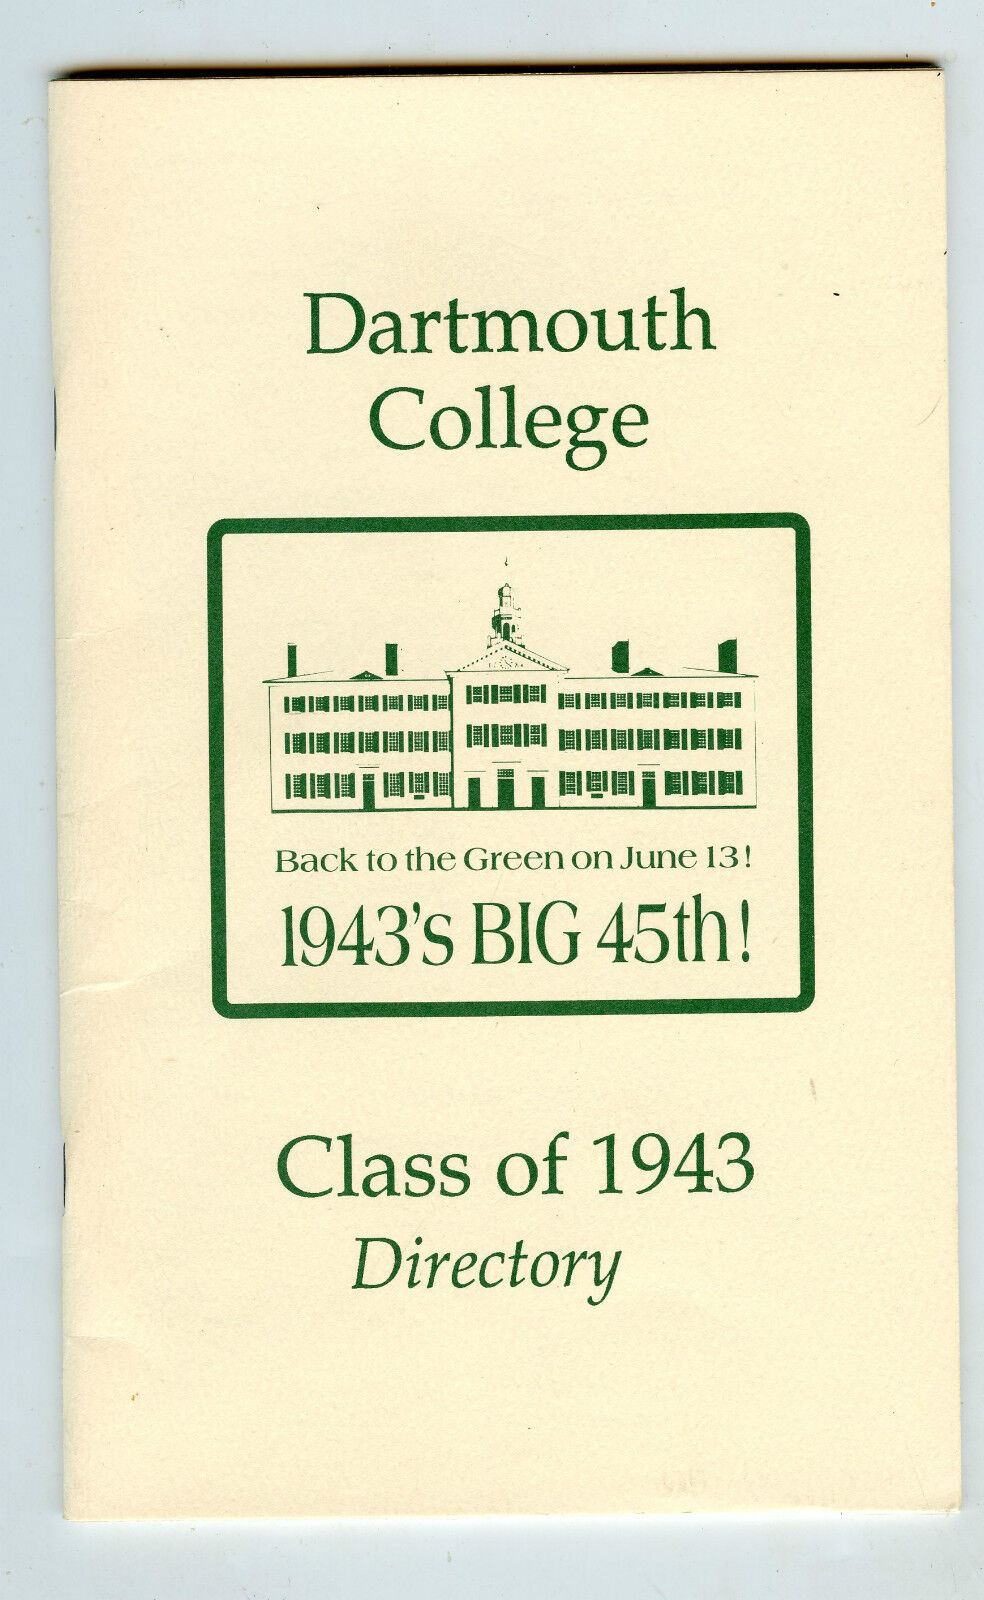 Dartmouth College - 45th Anniversary Reunion Booklet, 1943 Class - Names, 